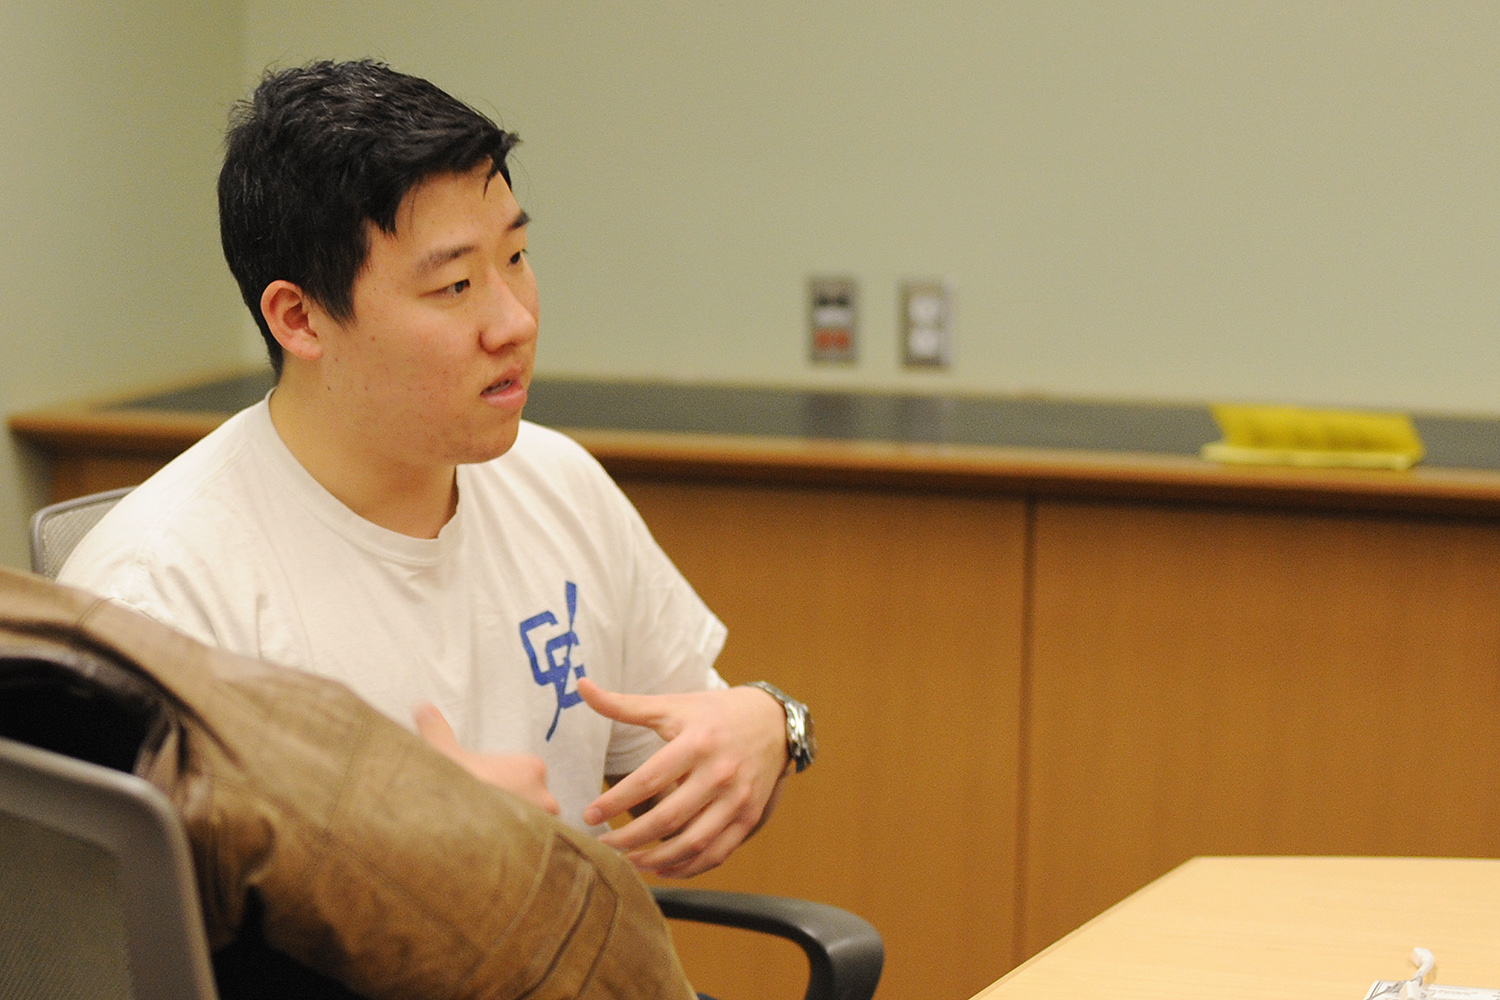 In the Korean-speaking group, a student discussed the dangers of dyes used in clothing. 